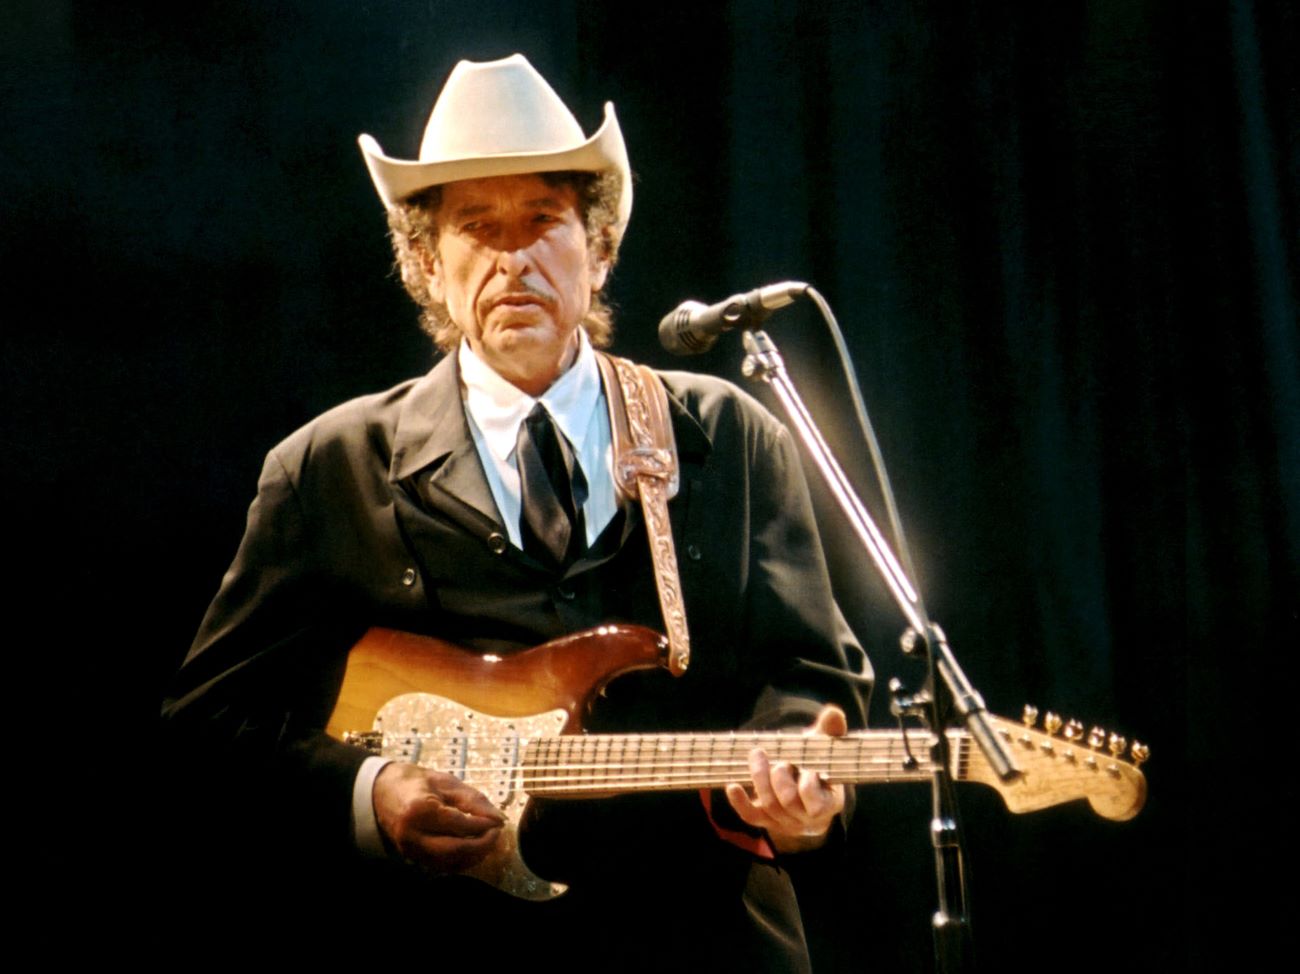 Bob Dylan is holding a guitar and wearing a cowboy hat.